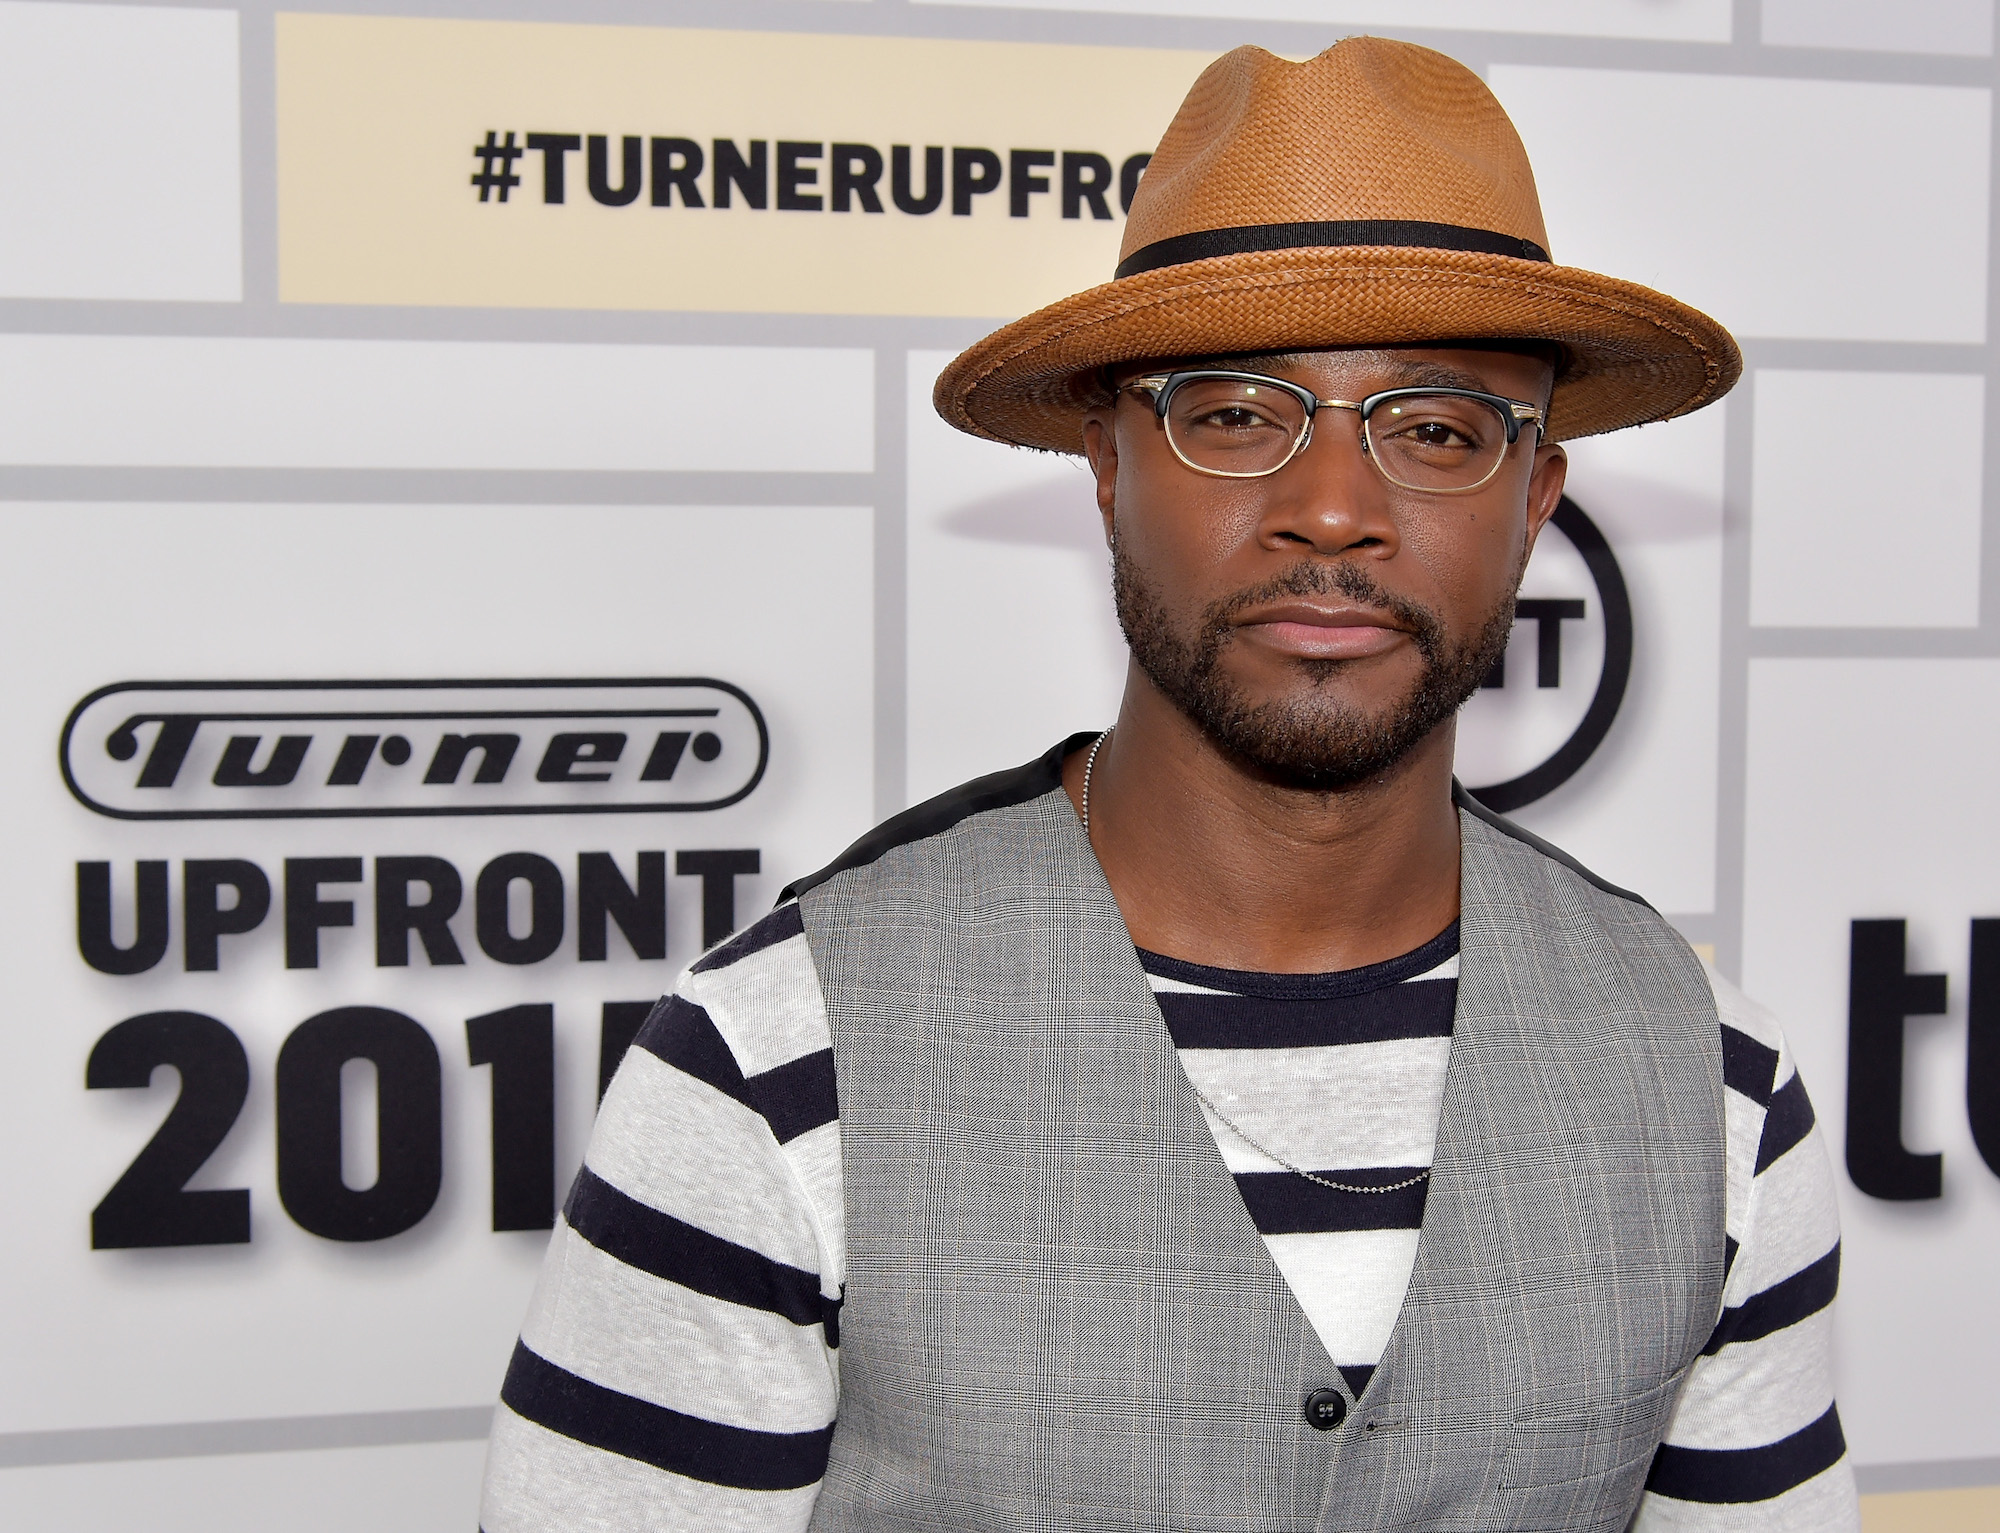 Taye Diggs attending the Turner Upfront 2015 at Madison Square Garden.